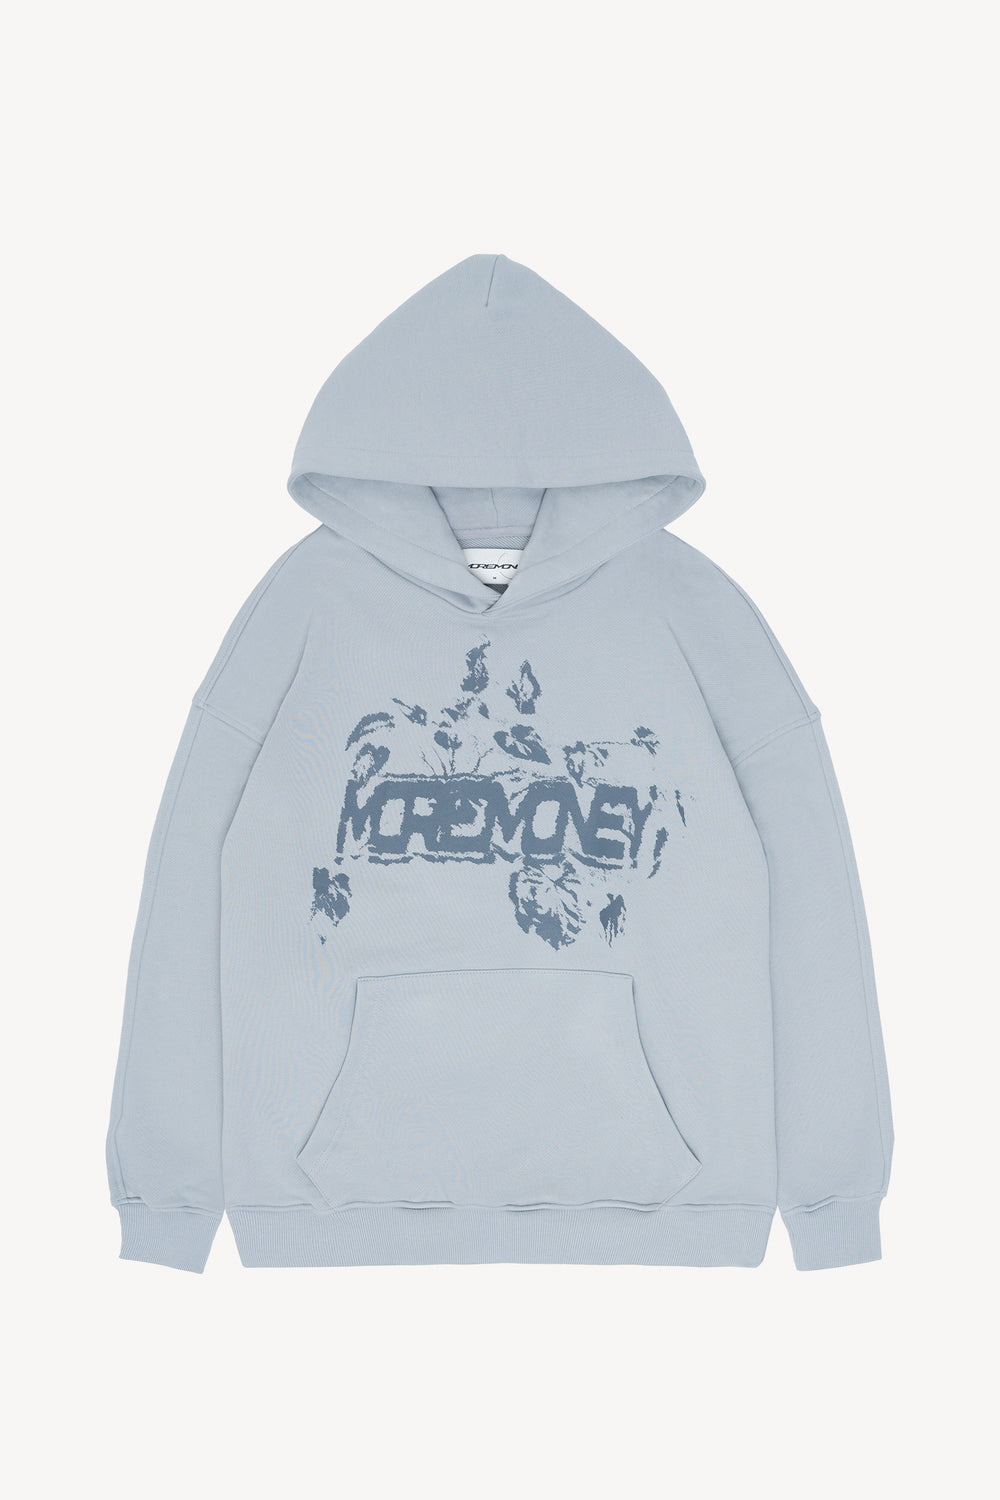 LUMP SUMS HOODIE GRAY – MORE MONEY MORE LOVE